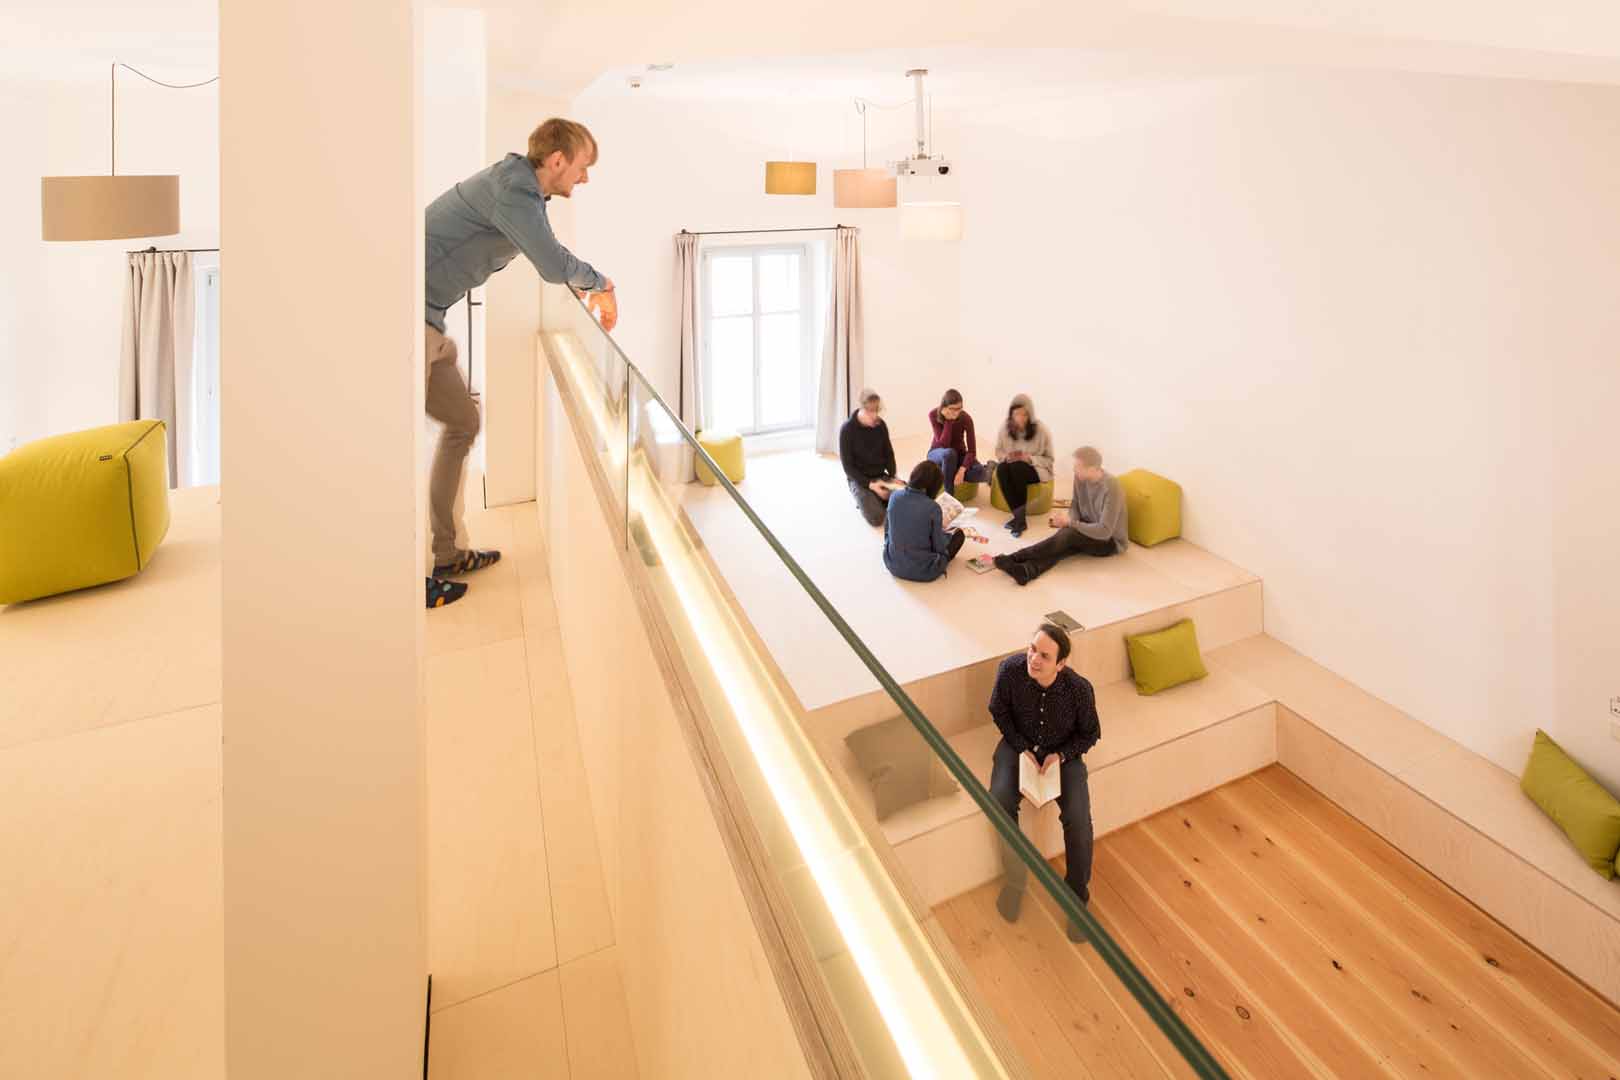 A person upstairs speaking with a group of people below